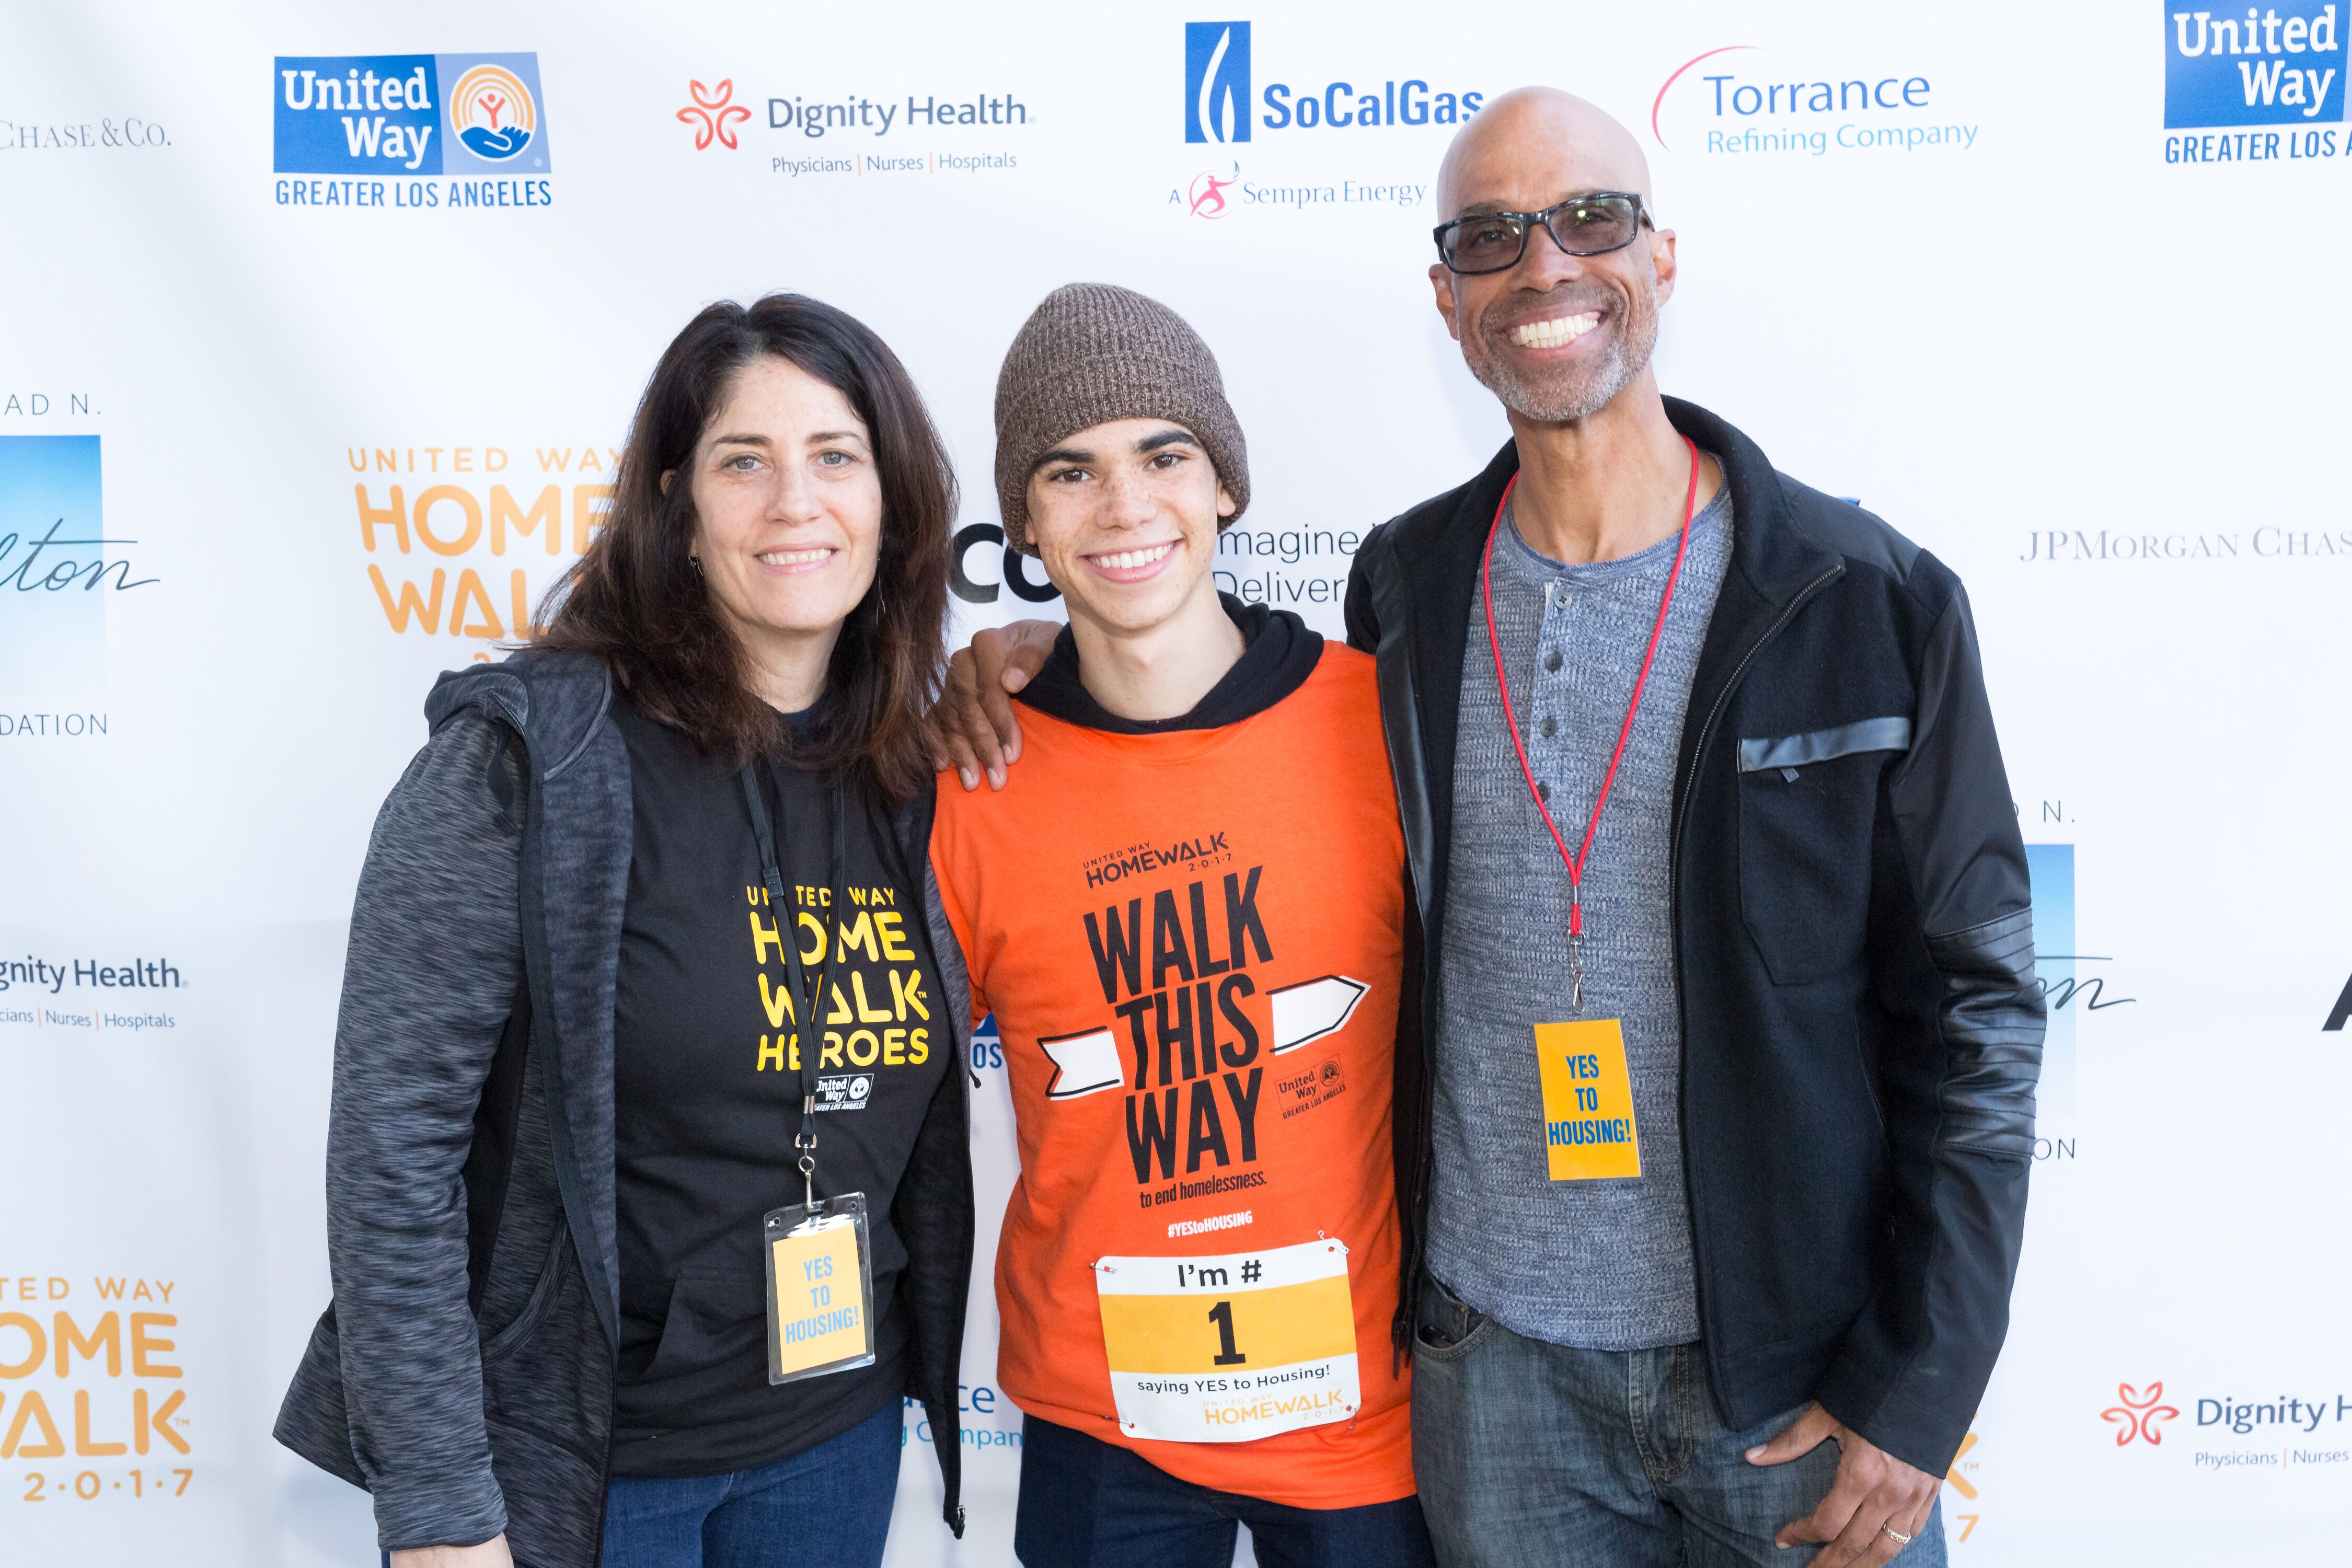 Camron Boyce and his parents Victor and Libby Boyce at a Home Walk event/ Source: Getty Images